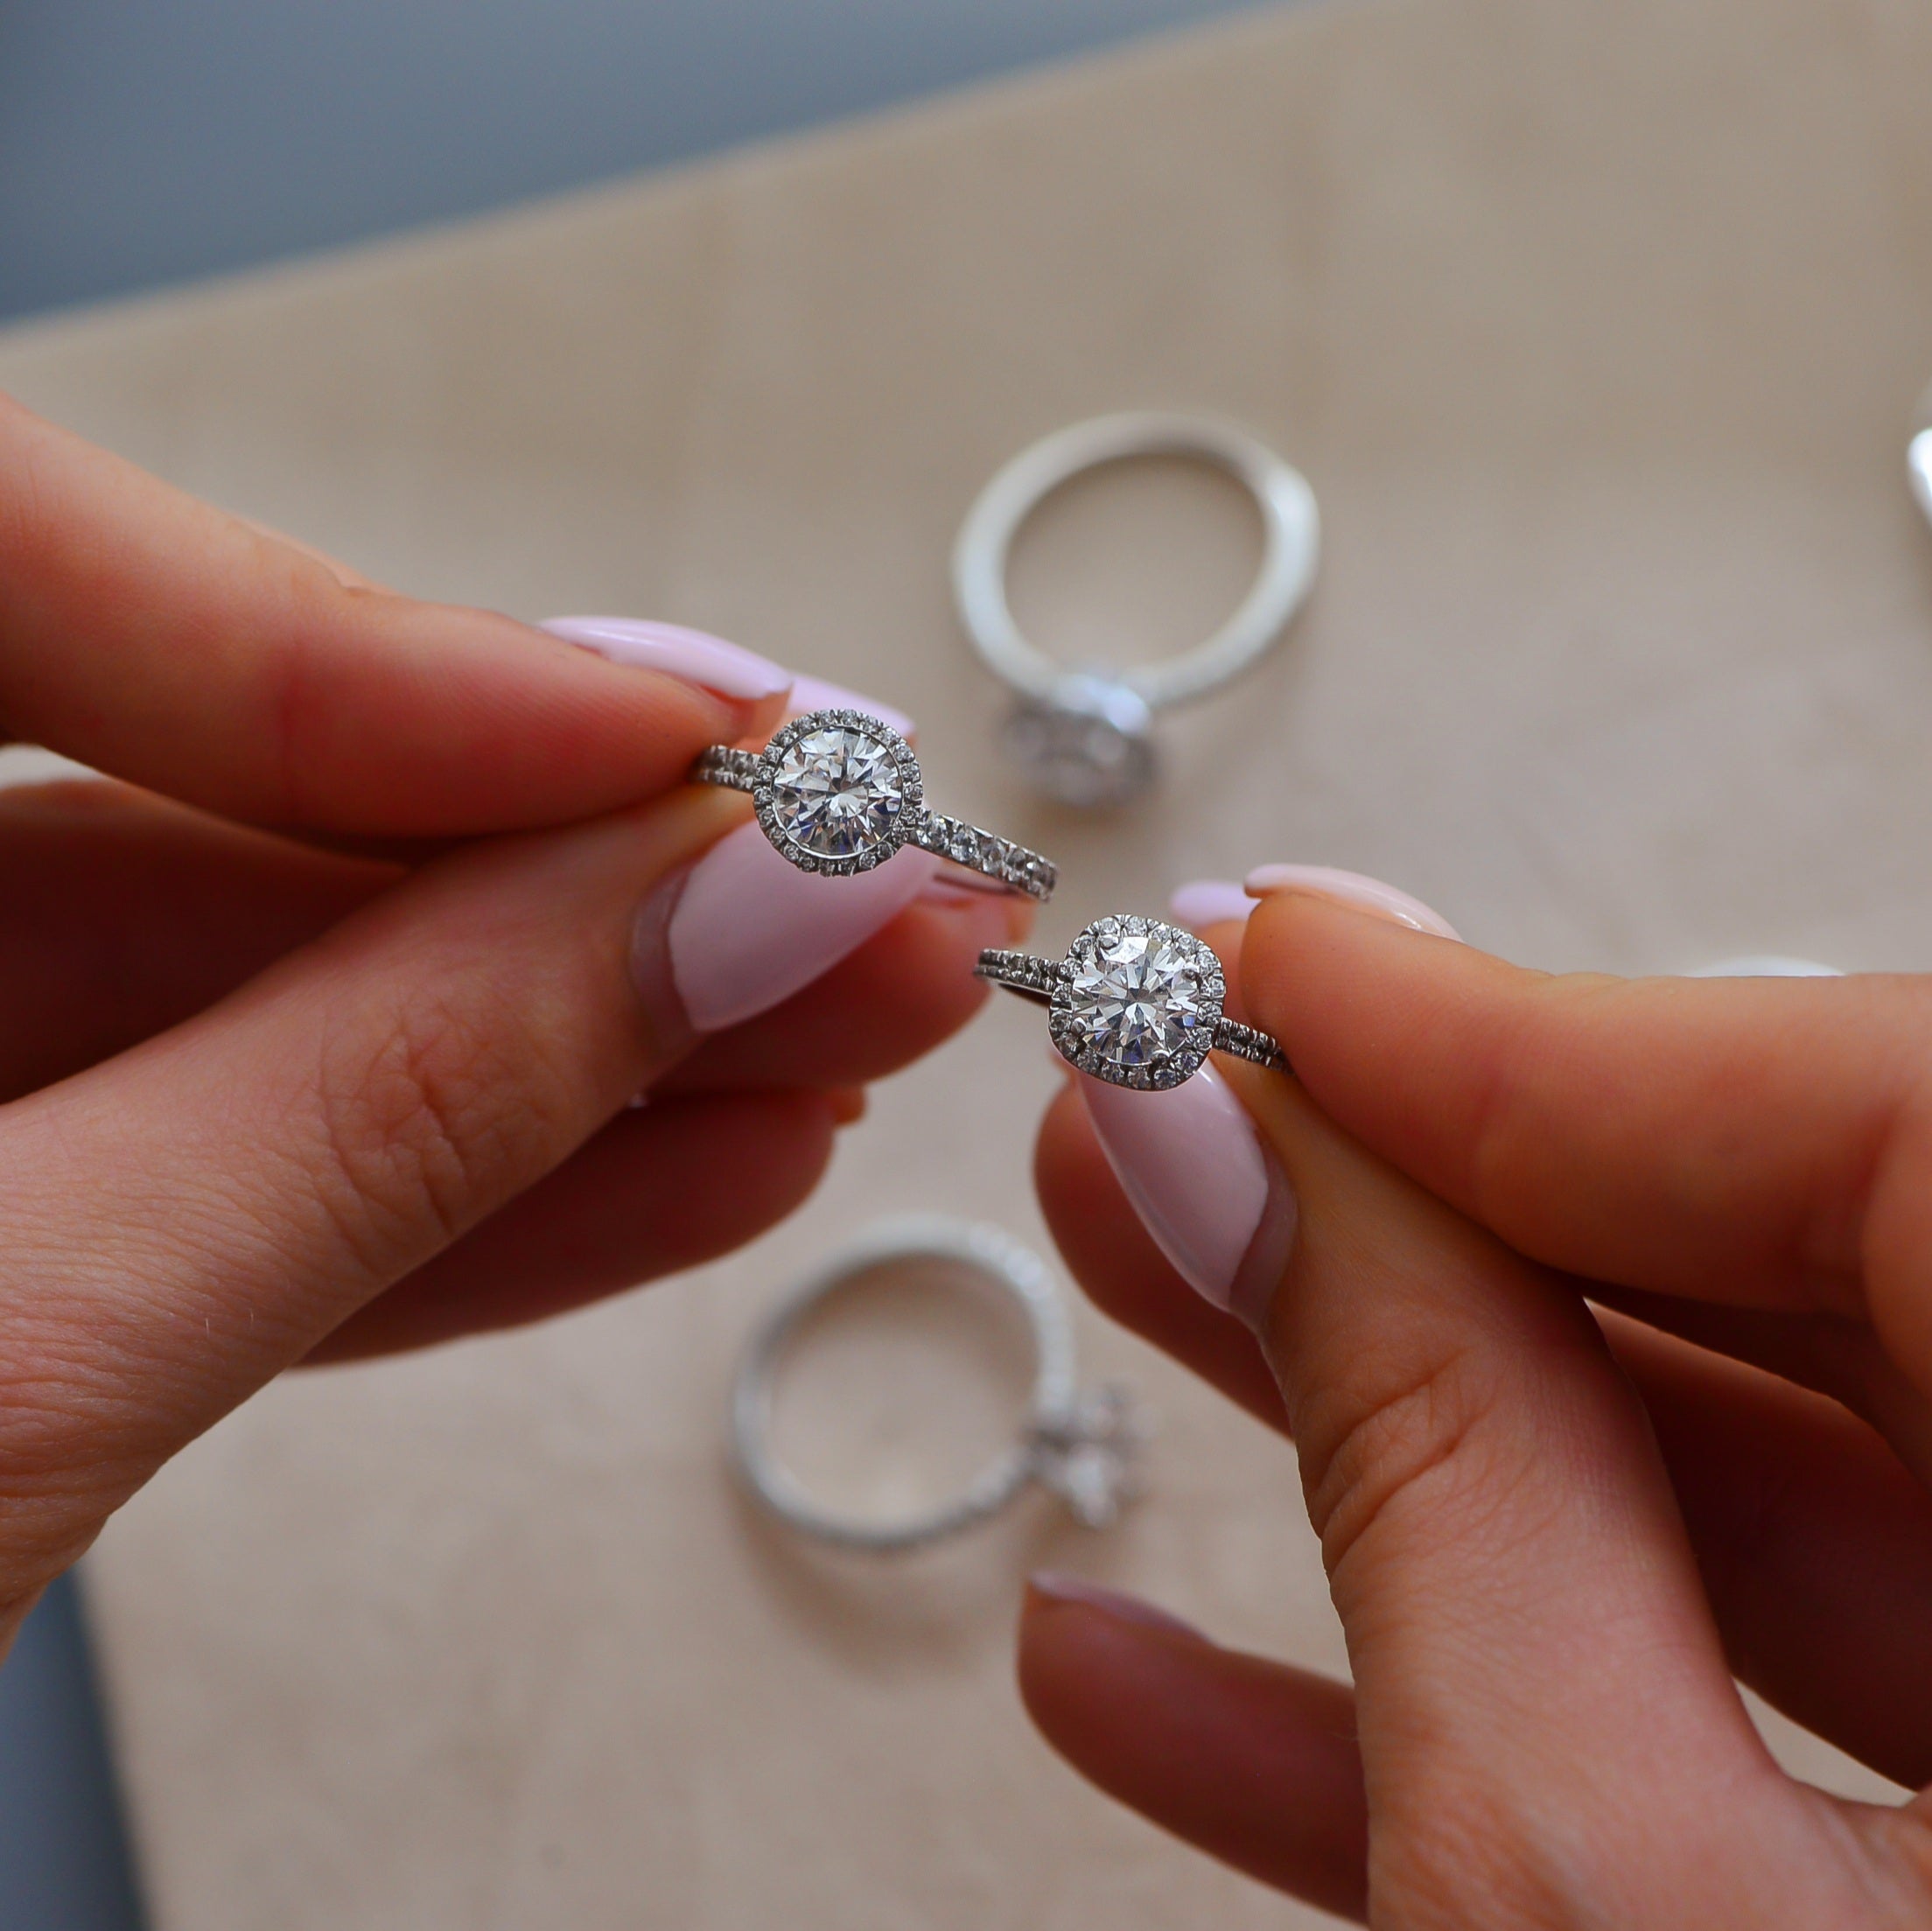 Tips on caring for and maintaining VVS diamond jewelry; an expert's advise